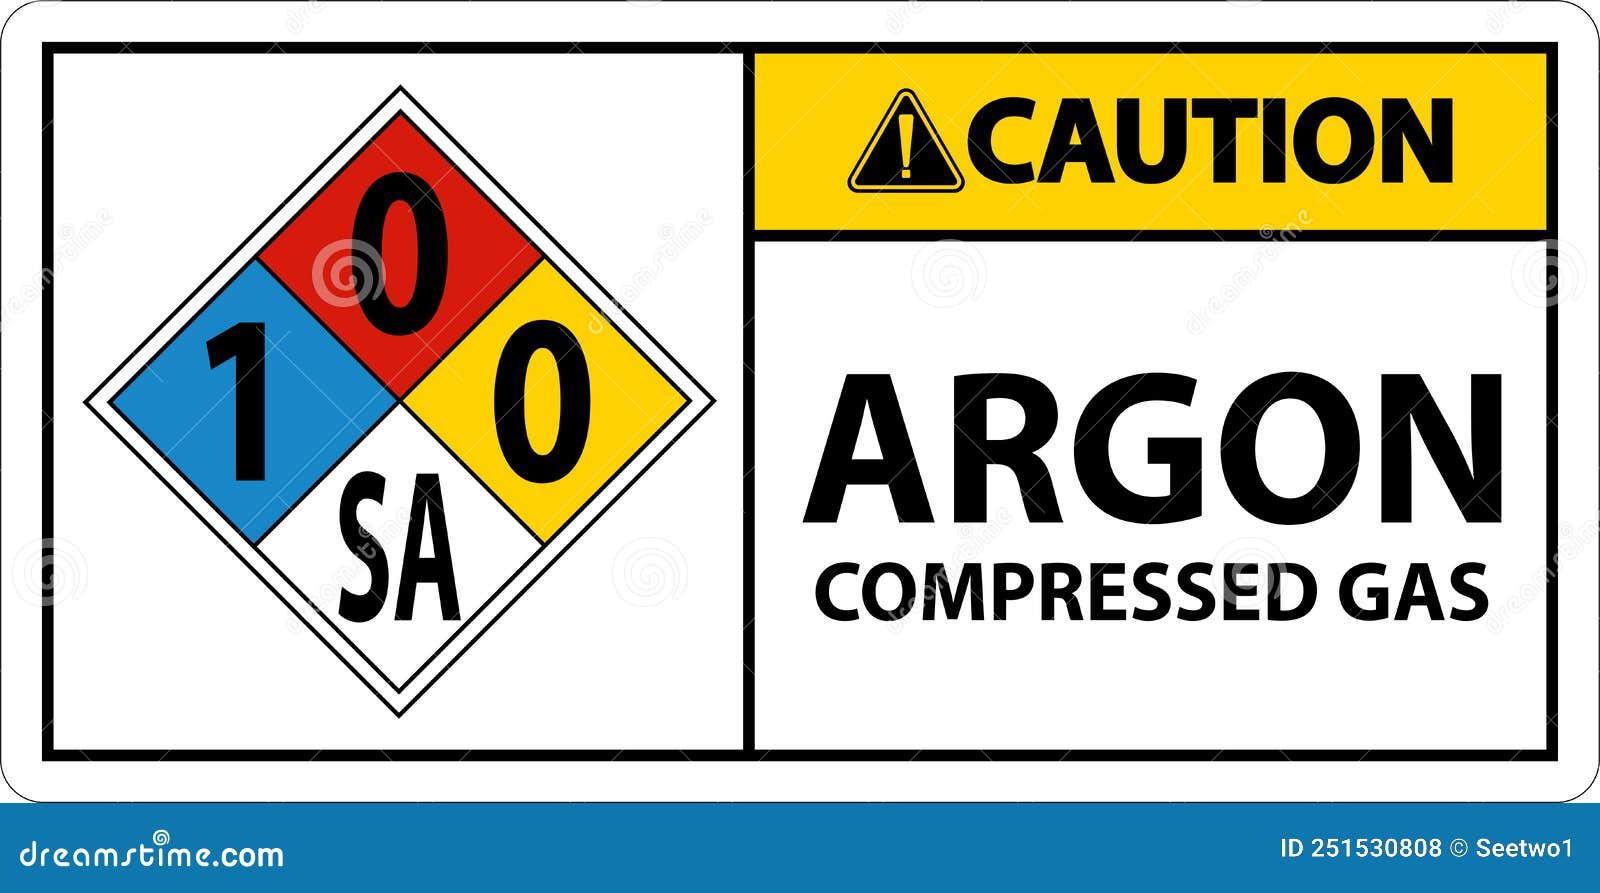 Nfpa Caution Argon Compressed Gas 1 0 0 Sa Sign Stock Vector